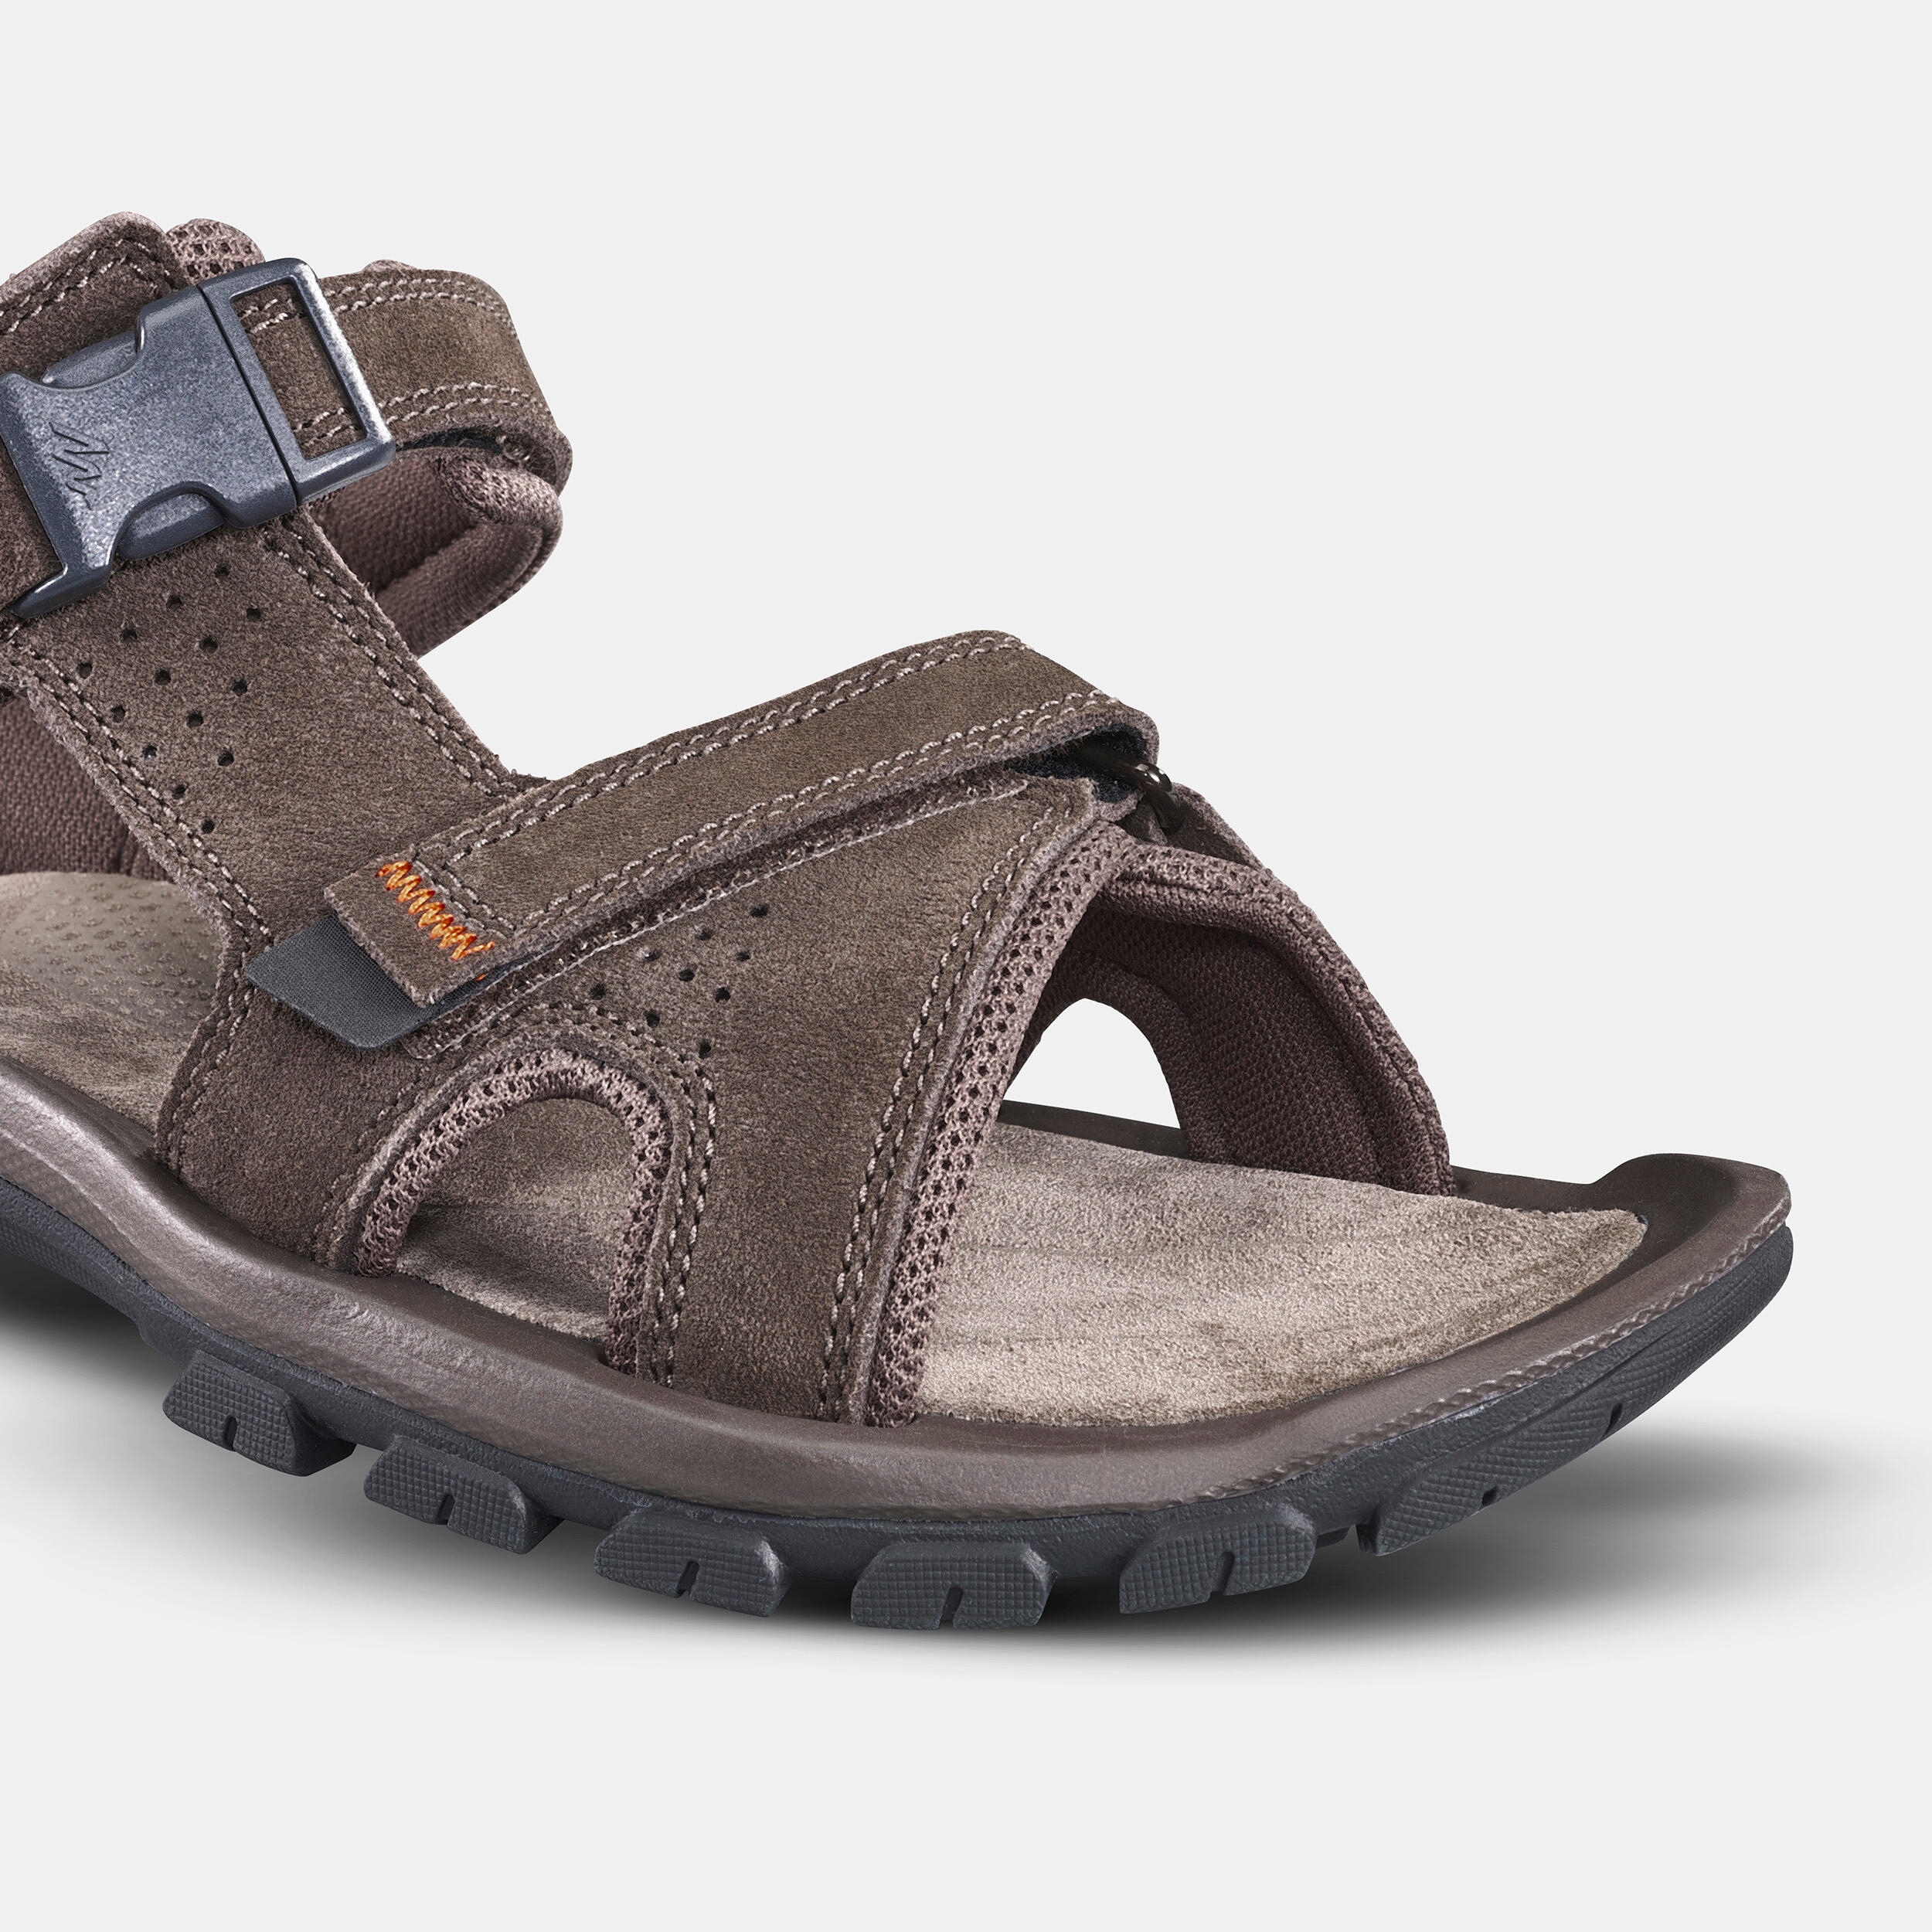 Men's Leather Hiking Sandals NH120 - QUECHUA